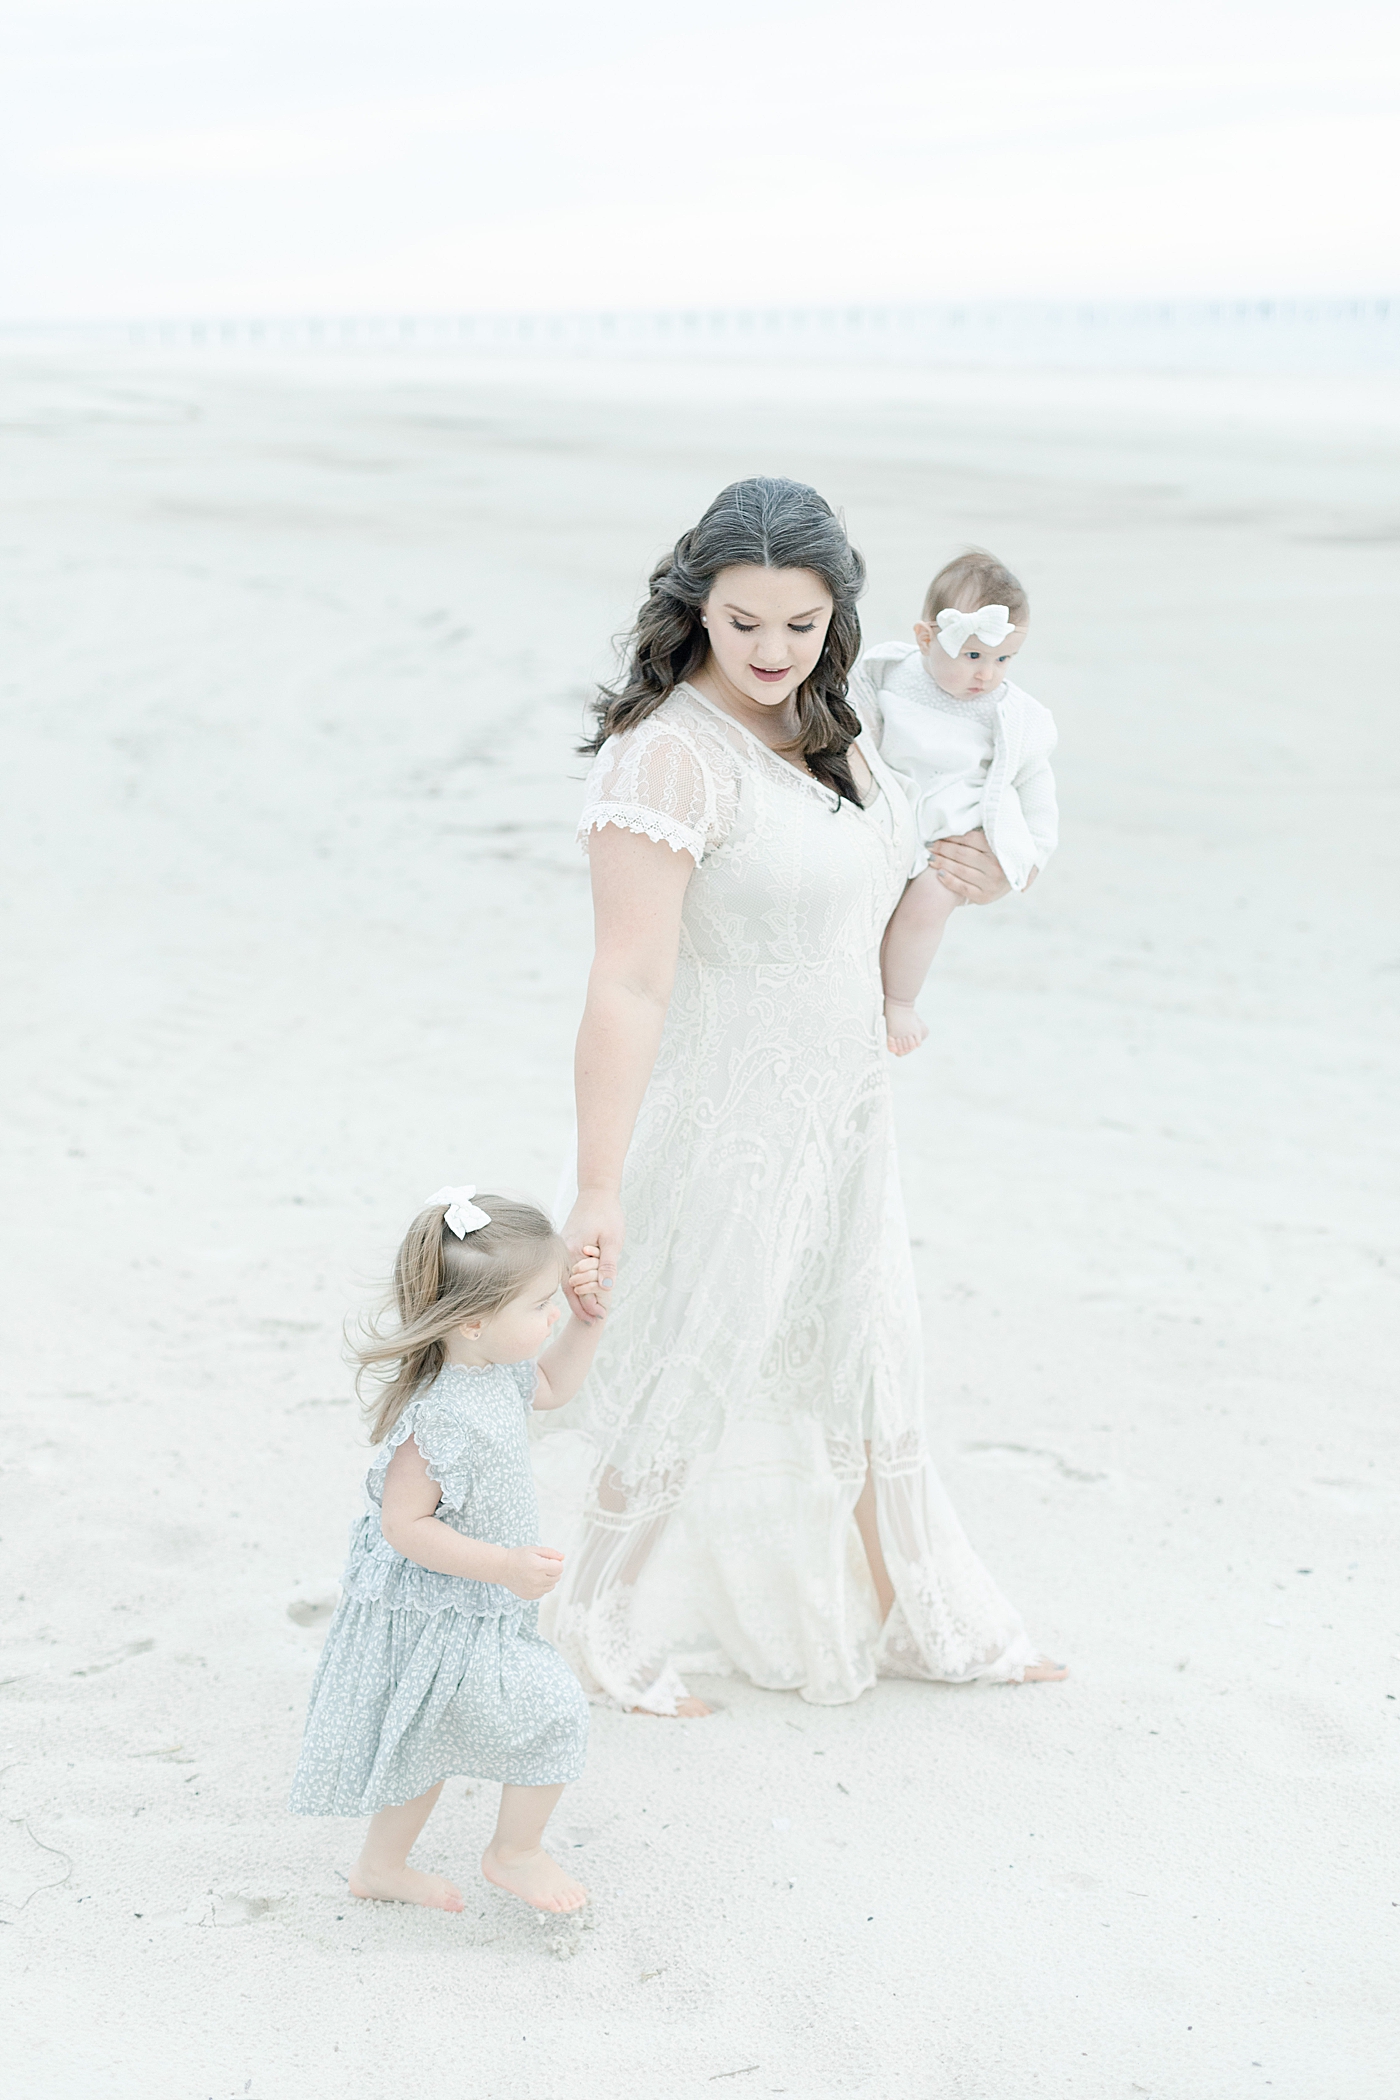 Mom in white holding hands with little girl walking on the beach | Photo by Pascagoula Family Photographer Little Sunshine Photography